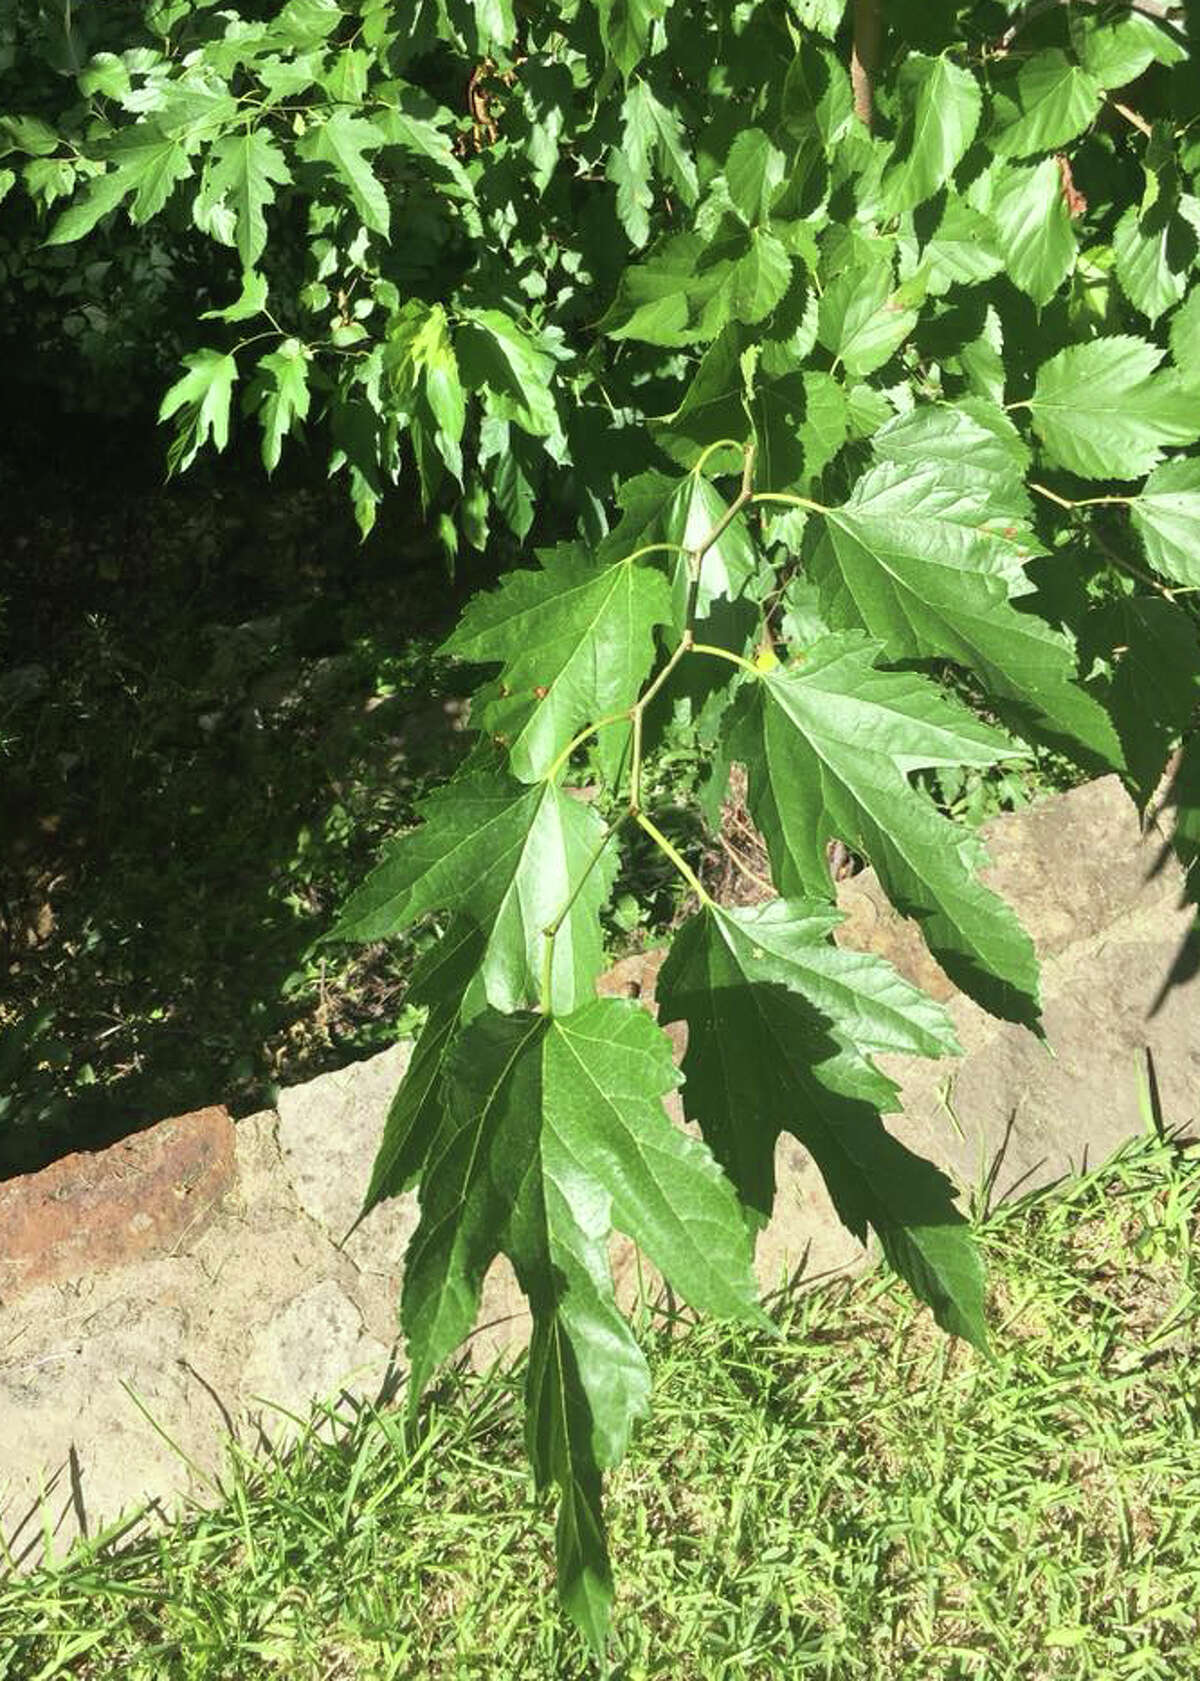 One young mulberry tree shows a large change in leaf shape.